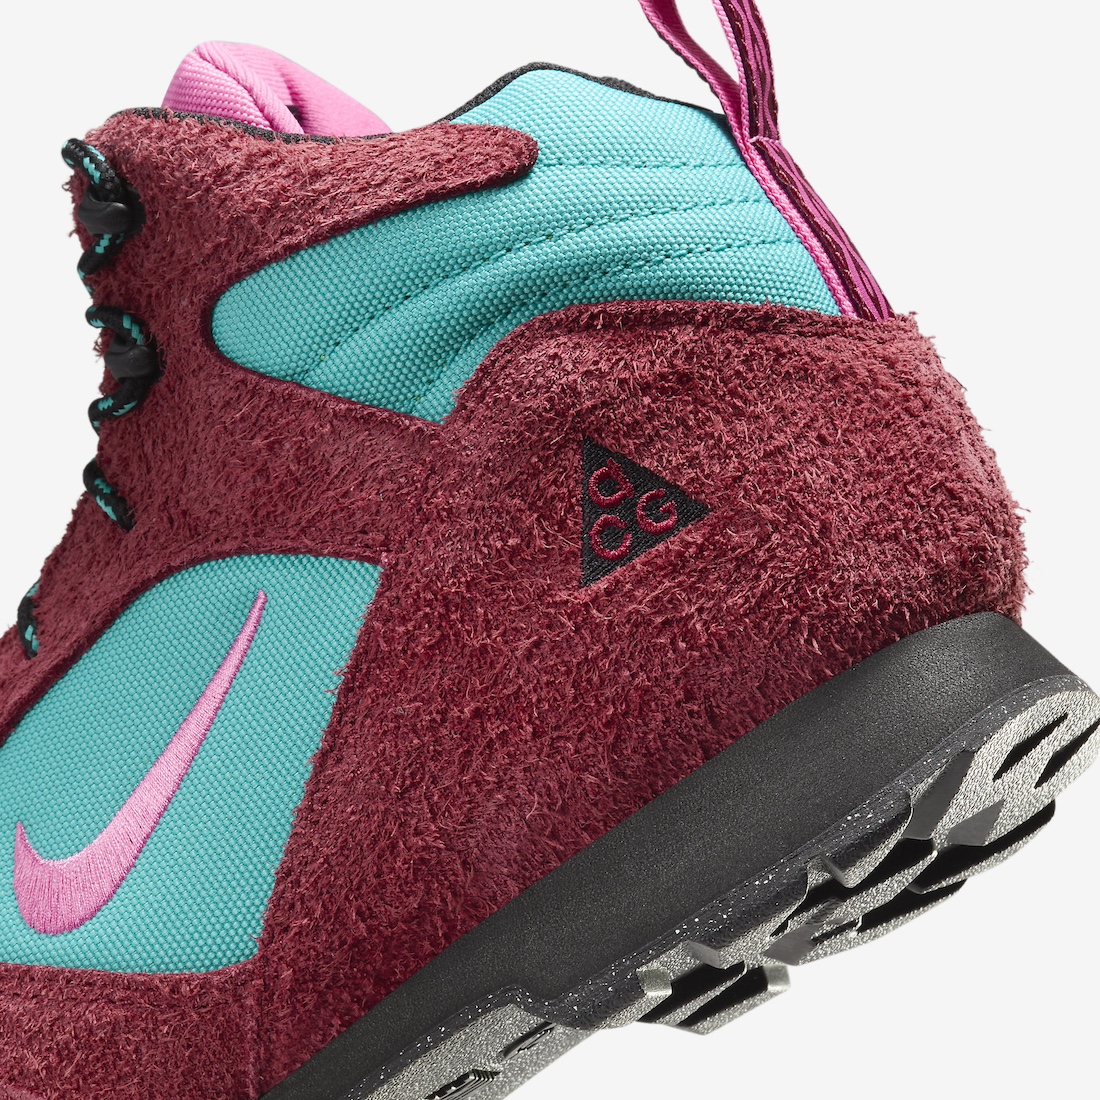 Nike ACG Torre Mid Team Red Dusty Cactus FD0212 600 7